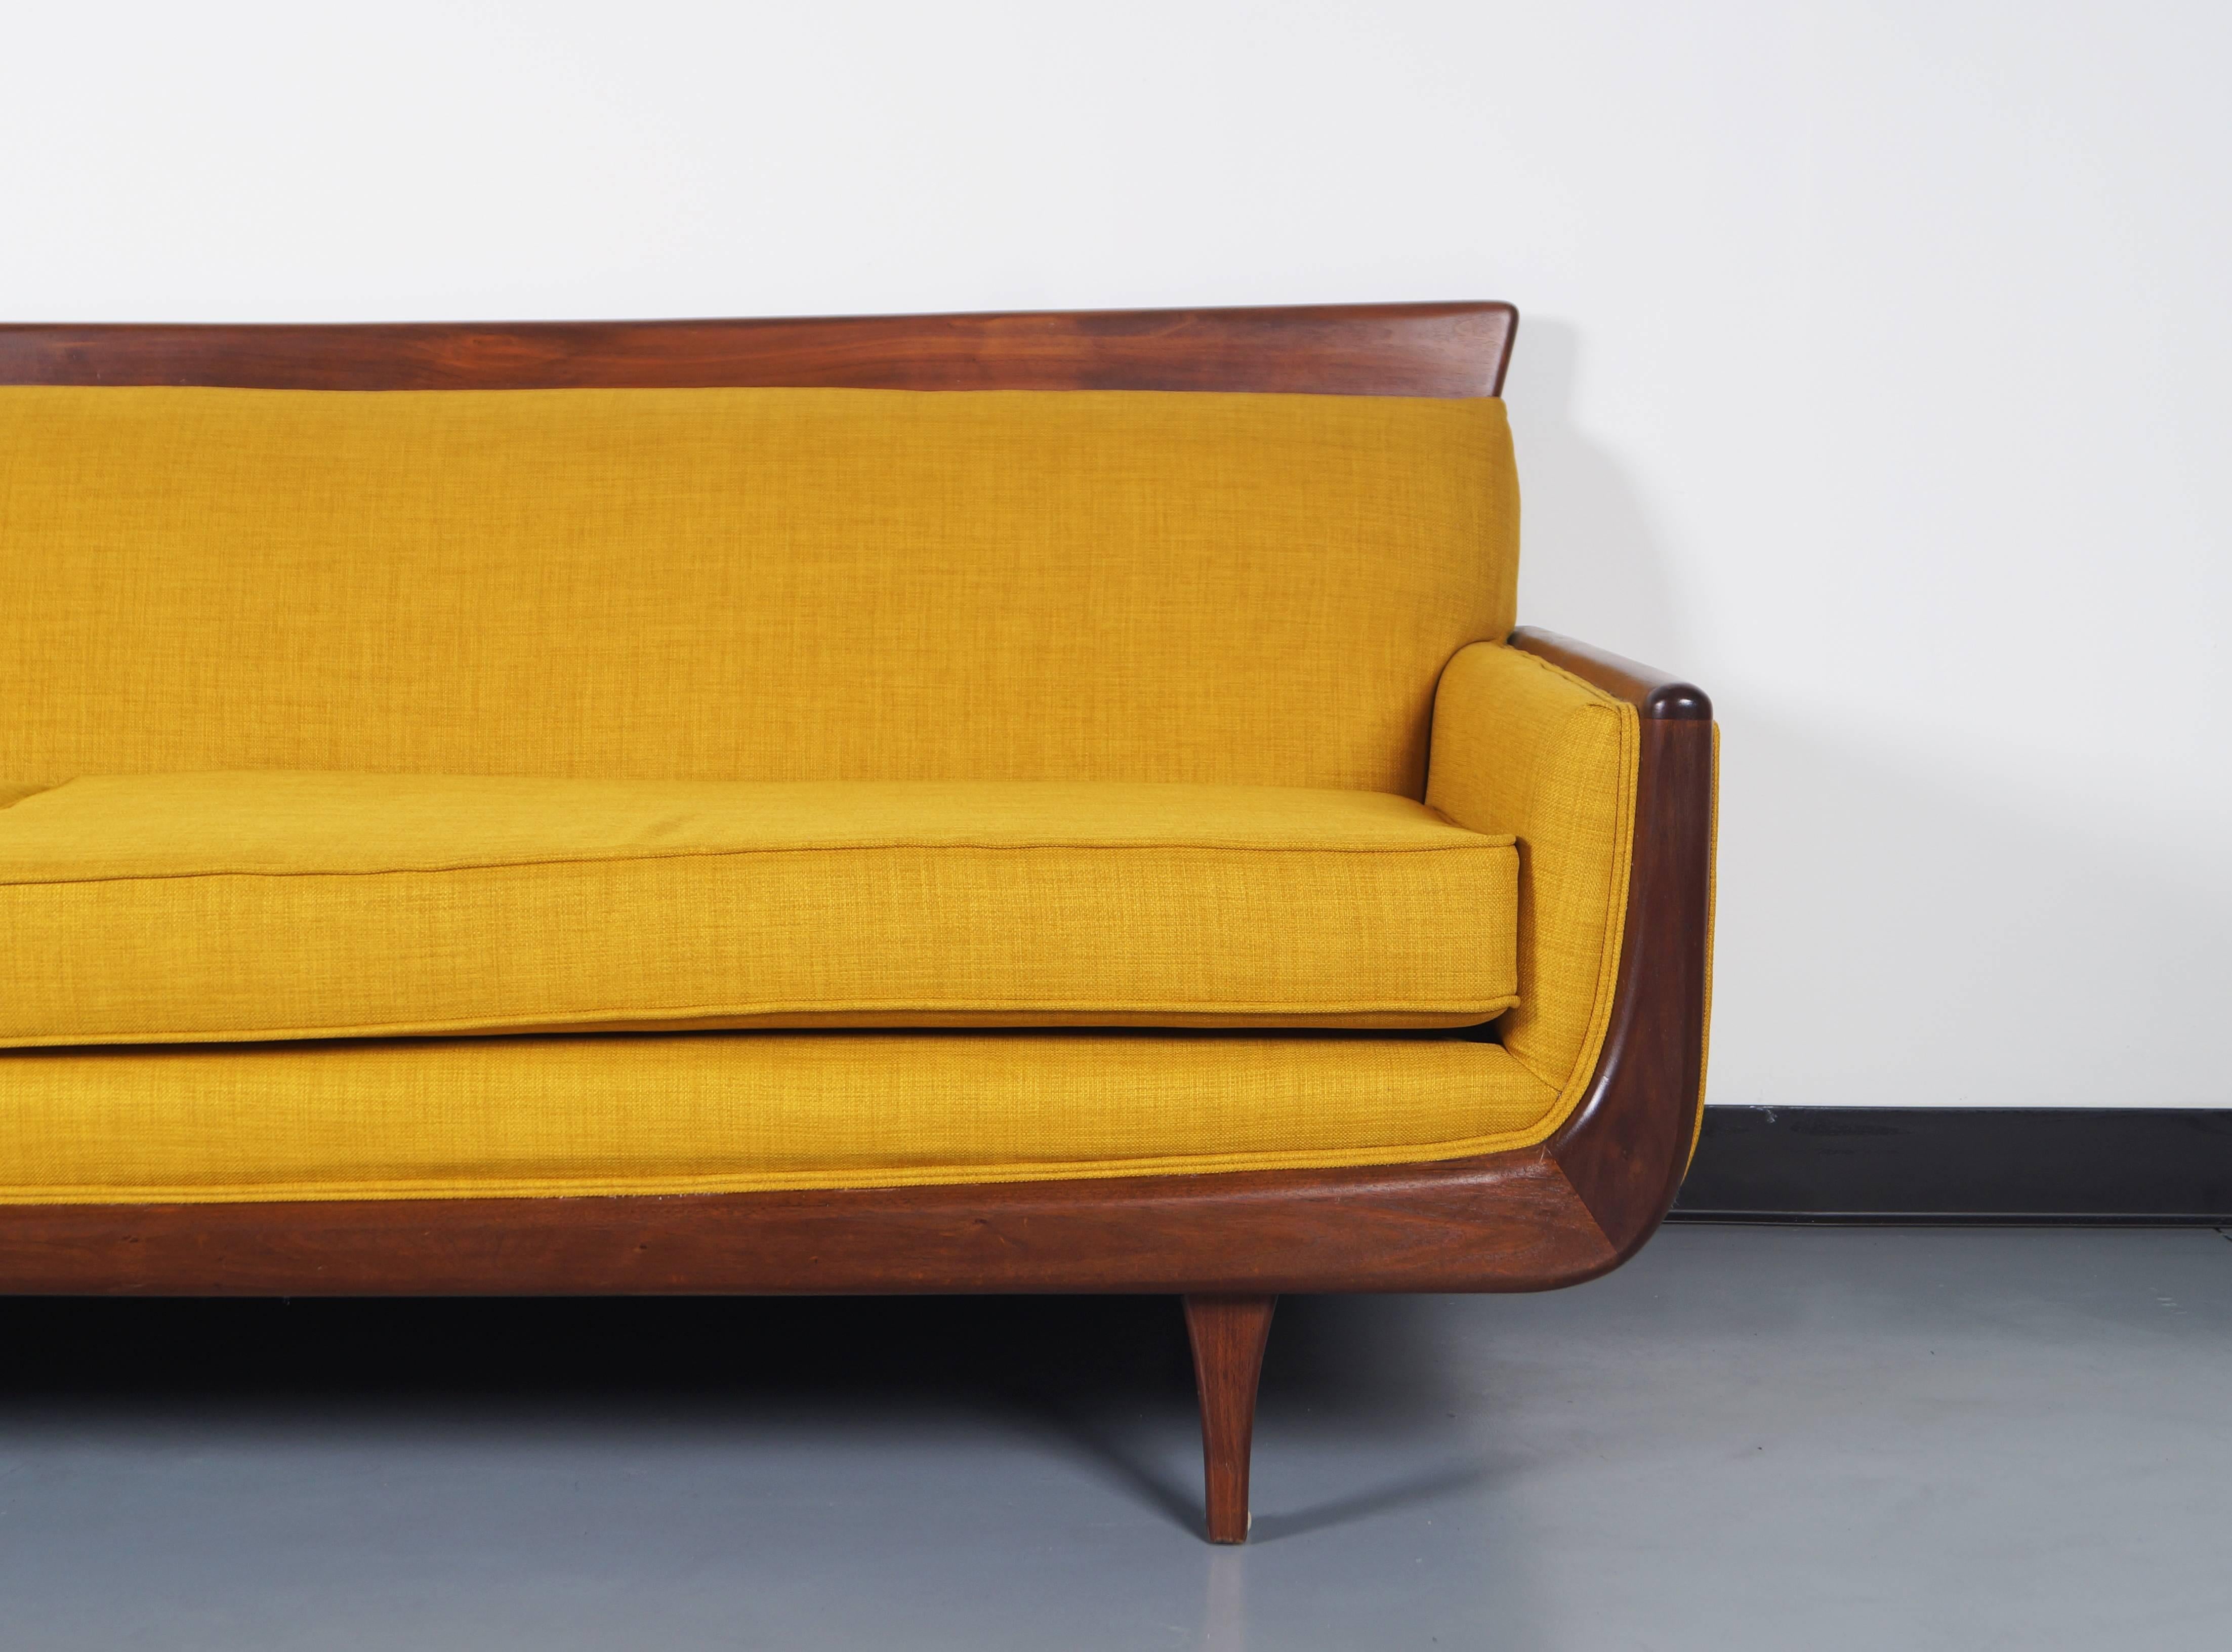 Amazing Mid-Century Modern sofa attributed to Adrian Pearsall.